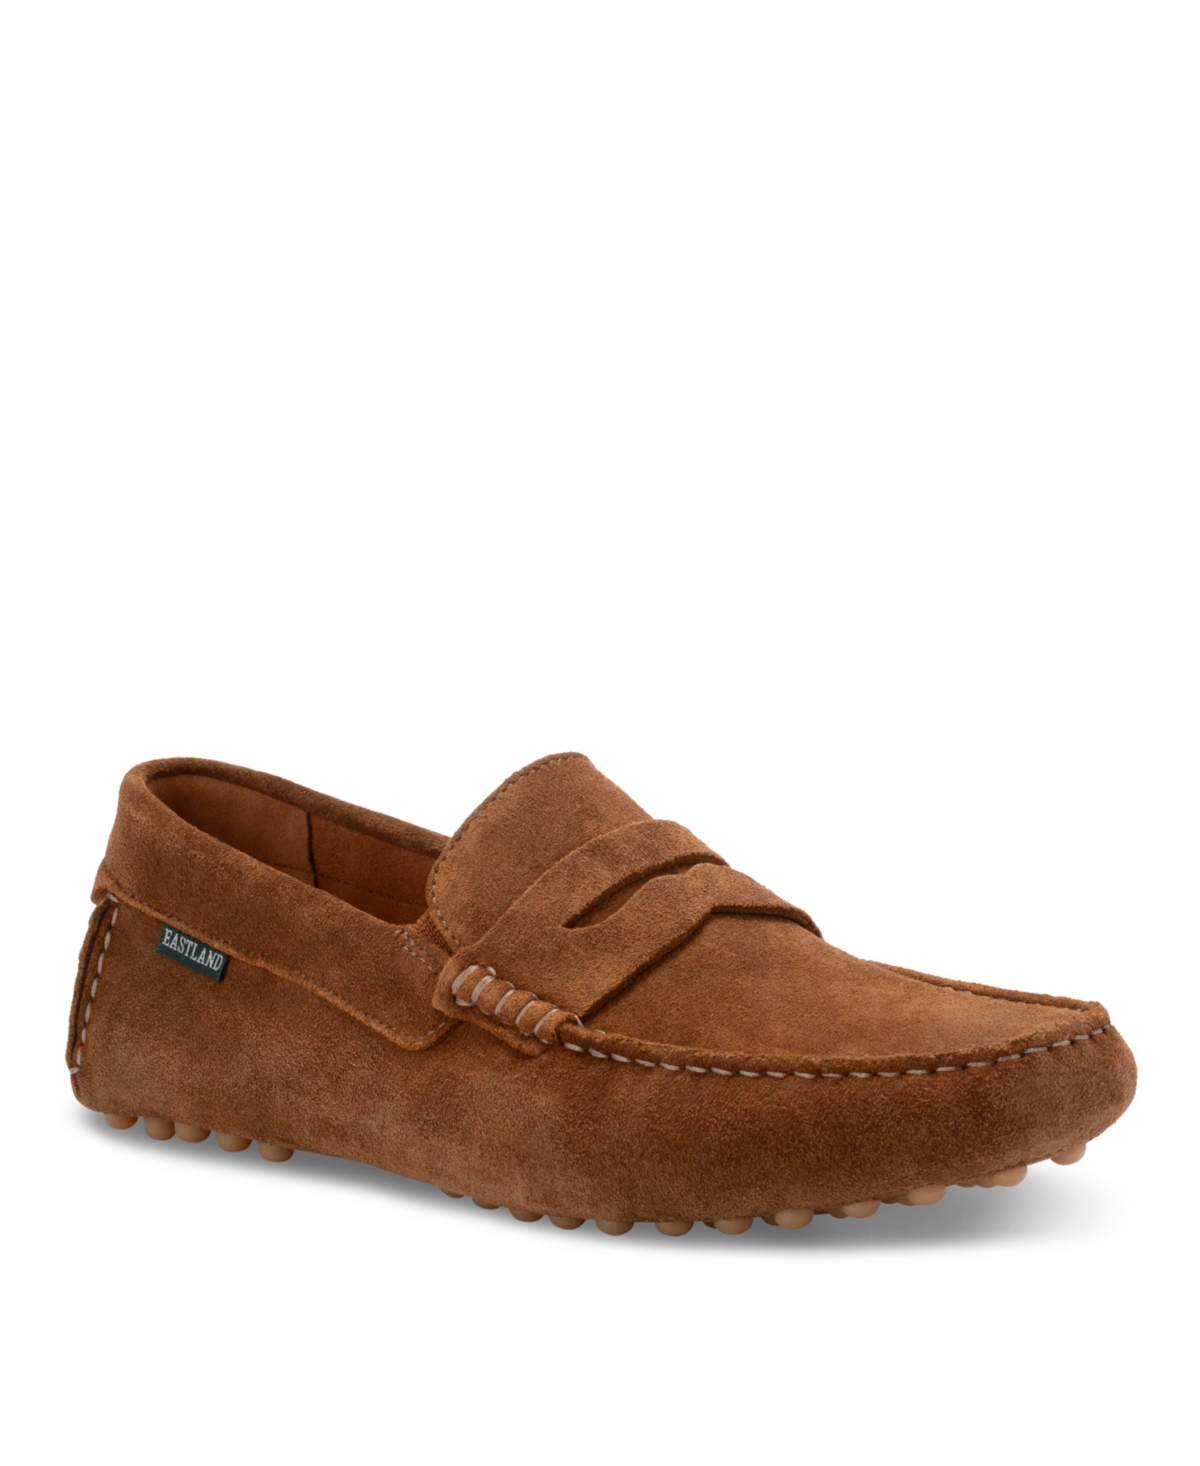 Men's Henderson Leather Casual Driving Loafers - Nutmeg